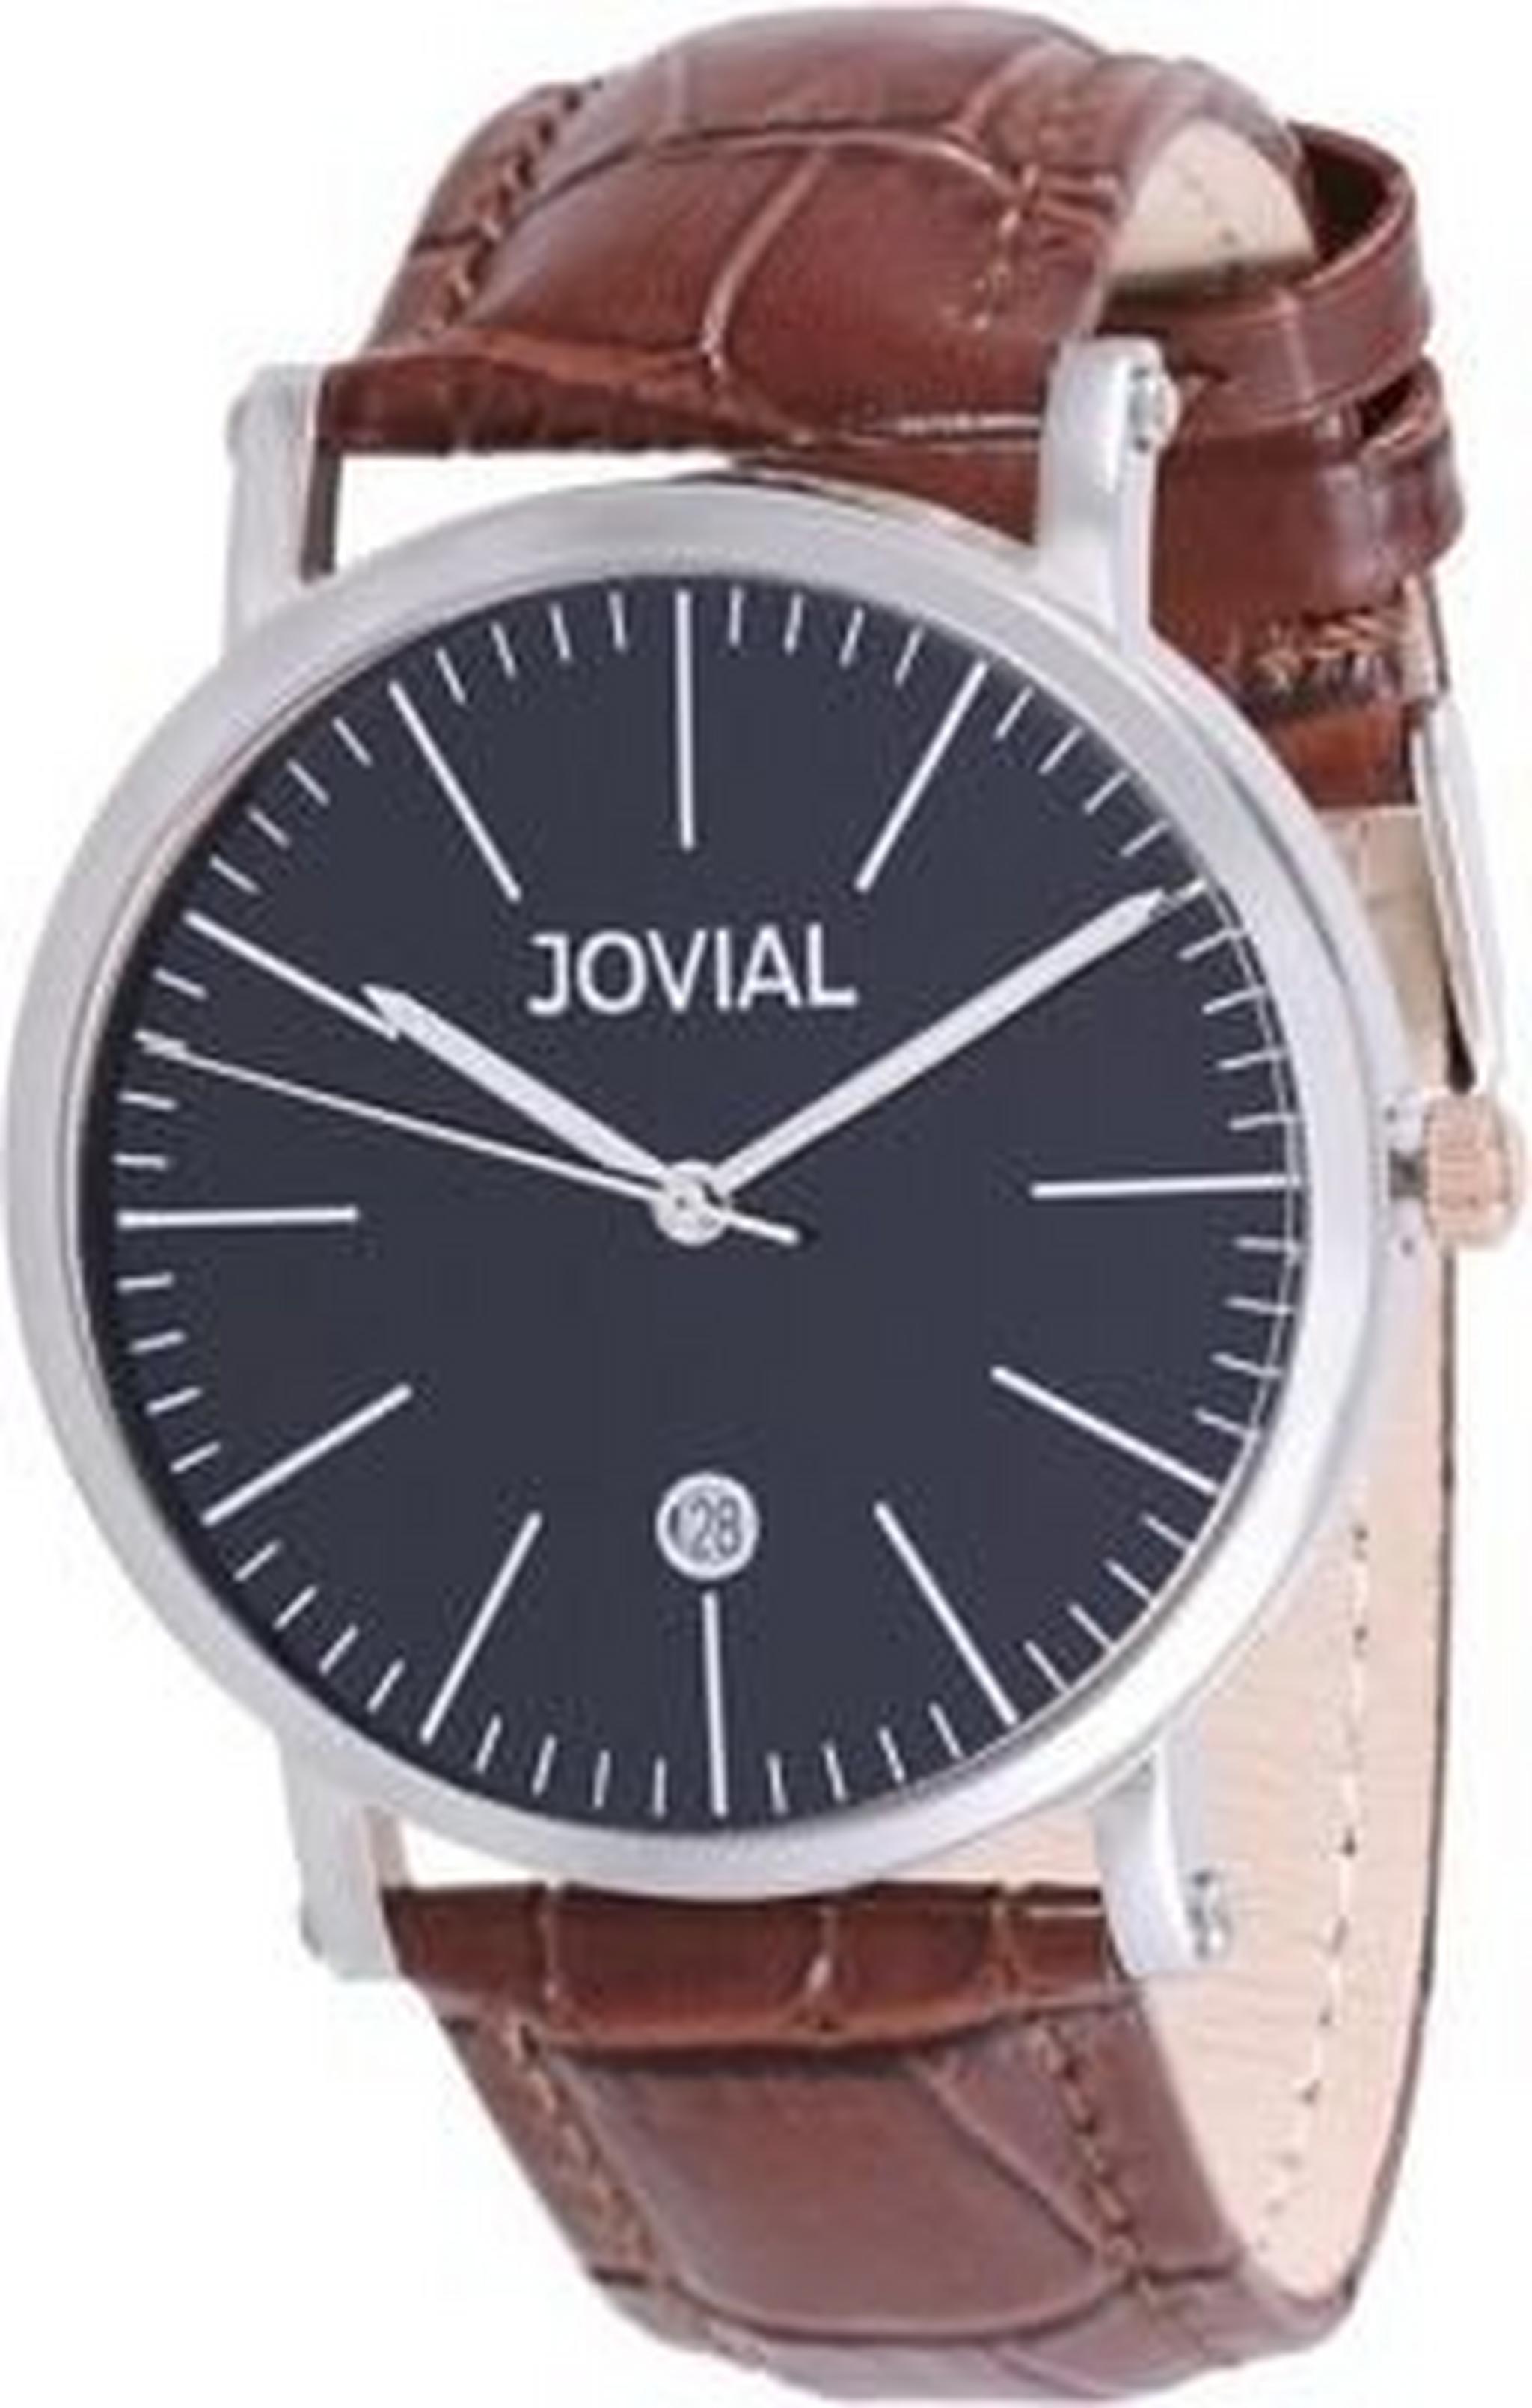 JOVIAL 5210-GRLQ-40 Gents Watch - Leather Strap